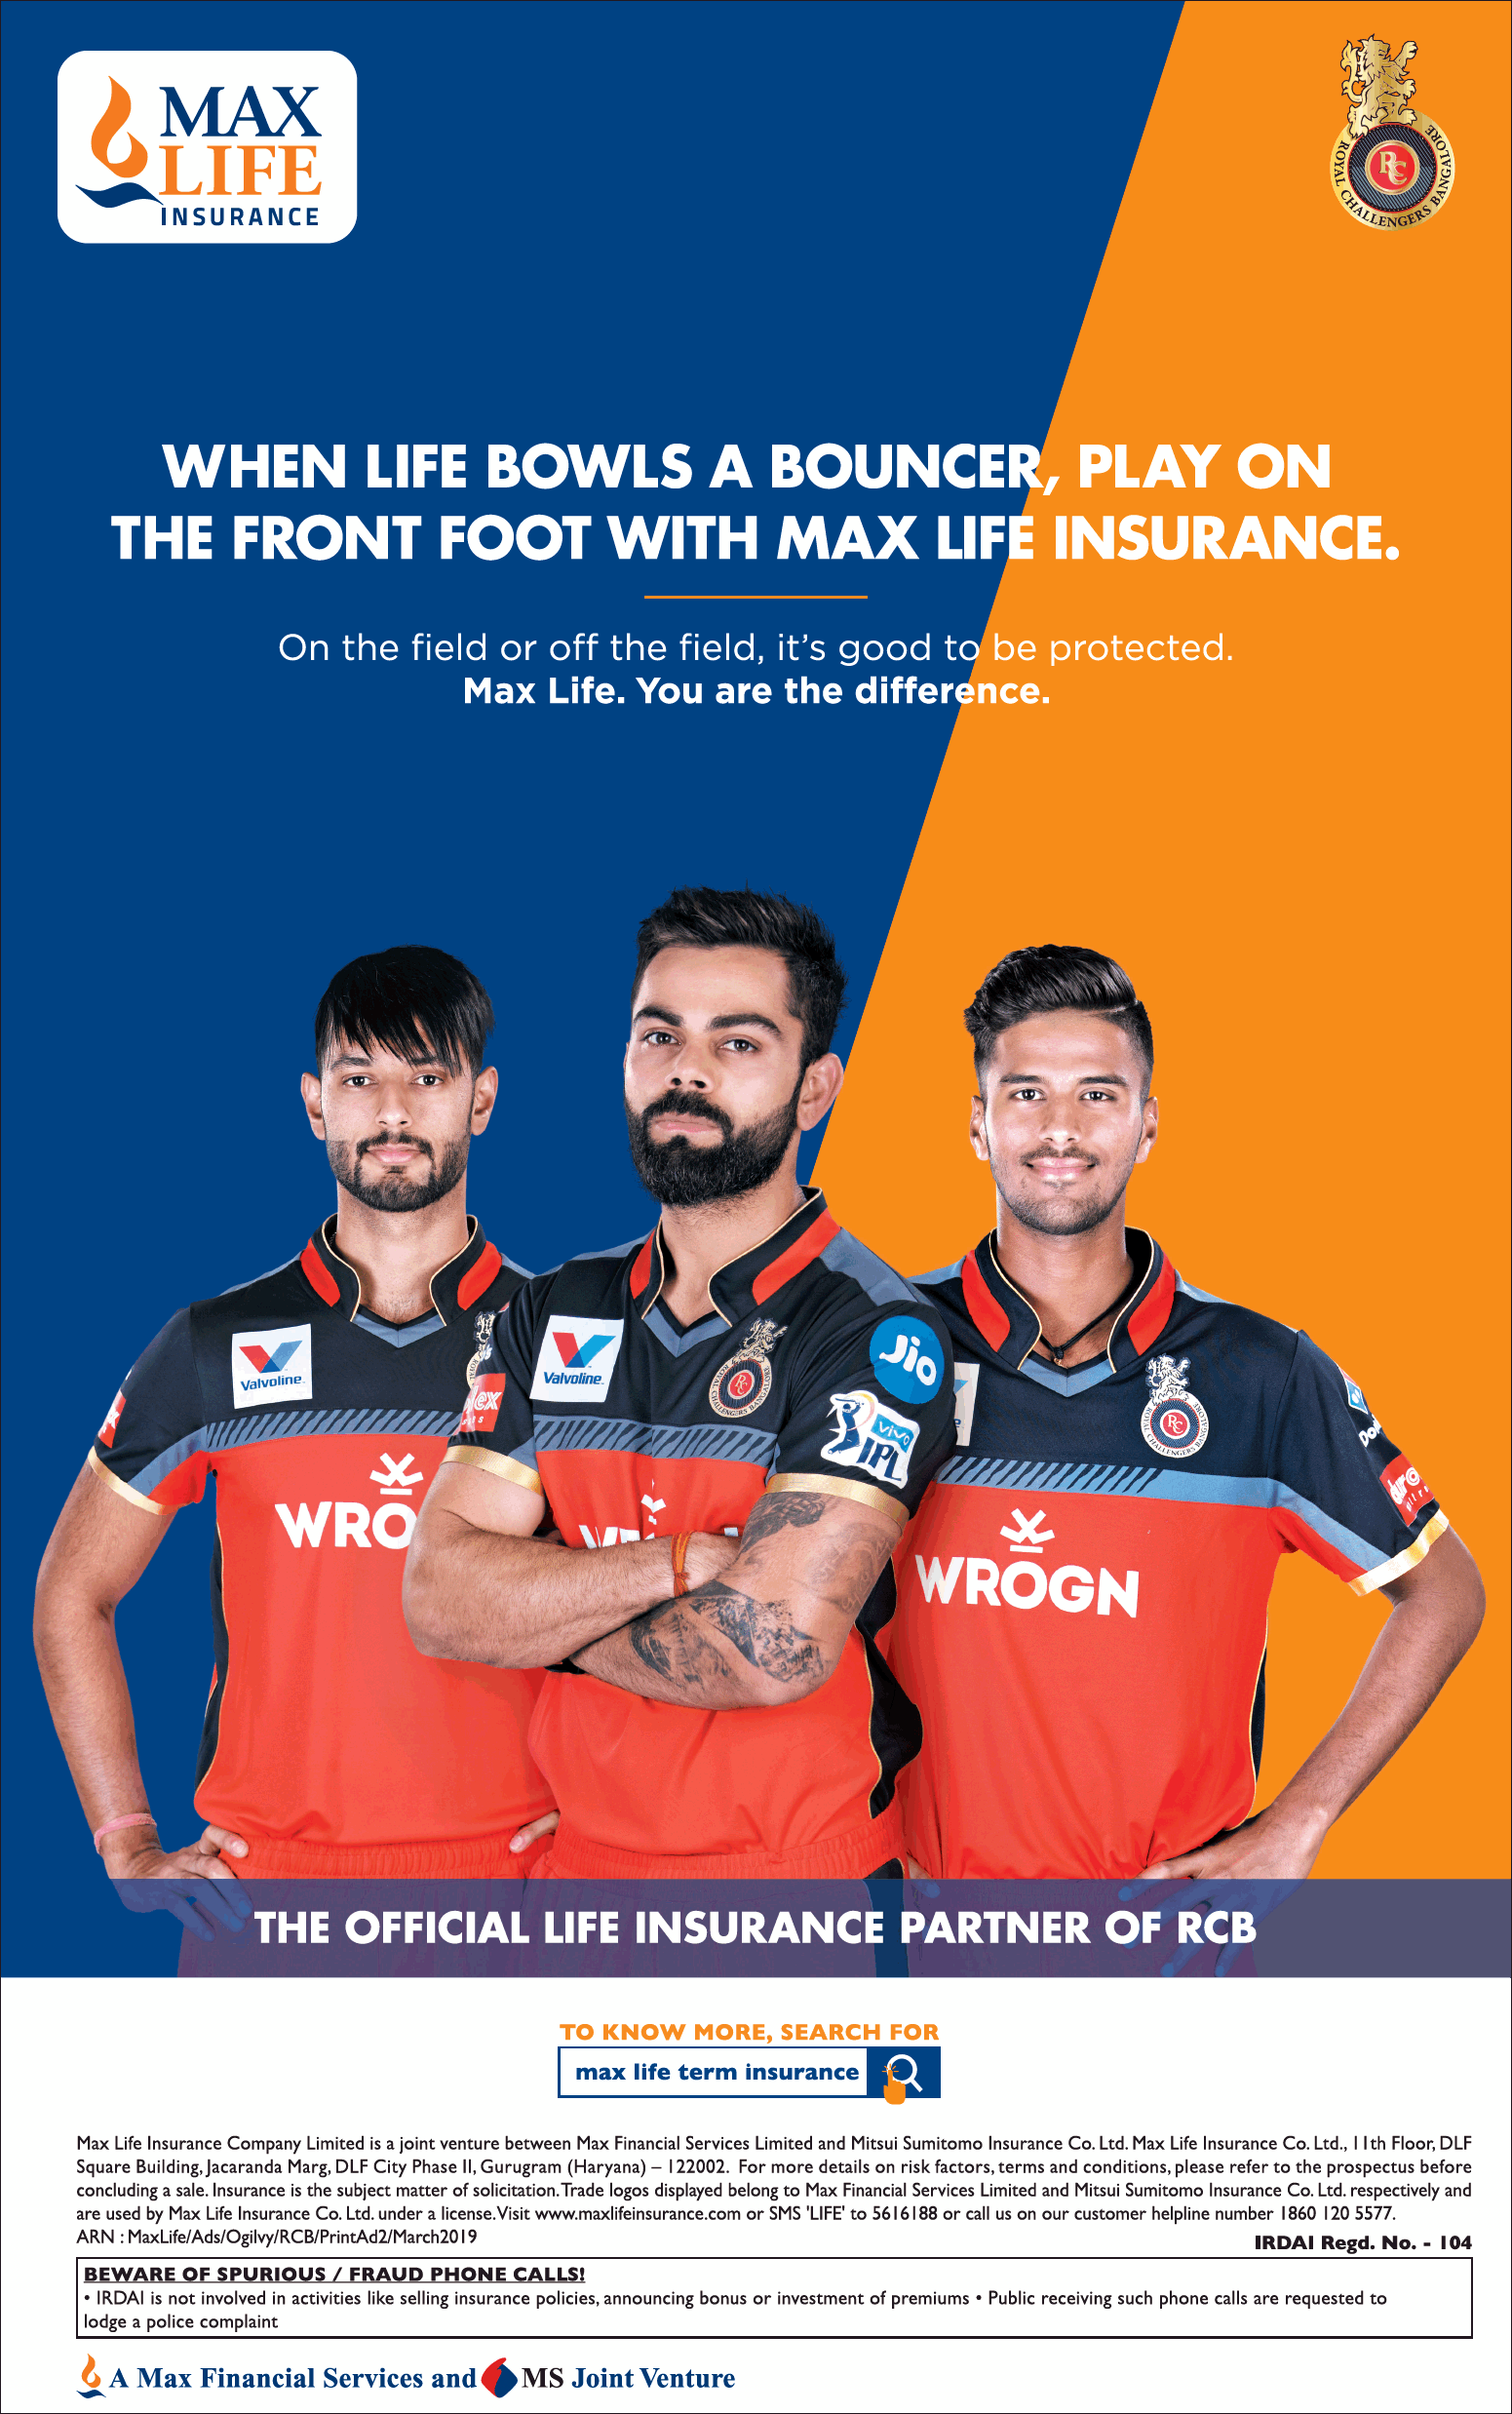 max-life-insurance-when-life-bowls-a-bouncer-play-on-the-front-foot-with-max-life-insurance-ad-times-of-india-delhi-26-03-2019.png